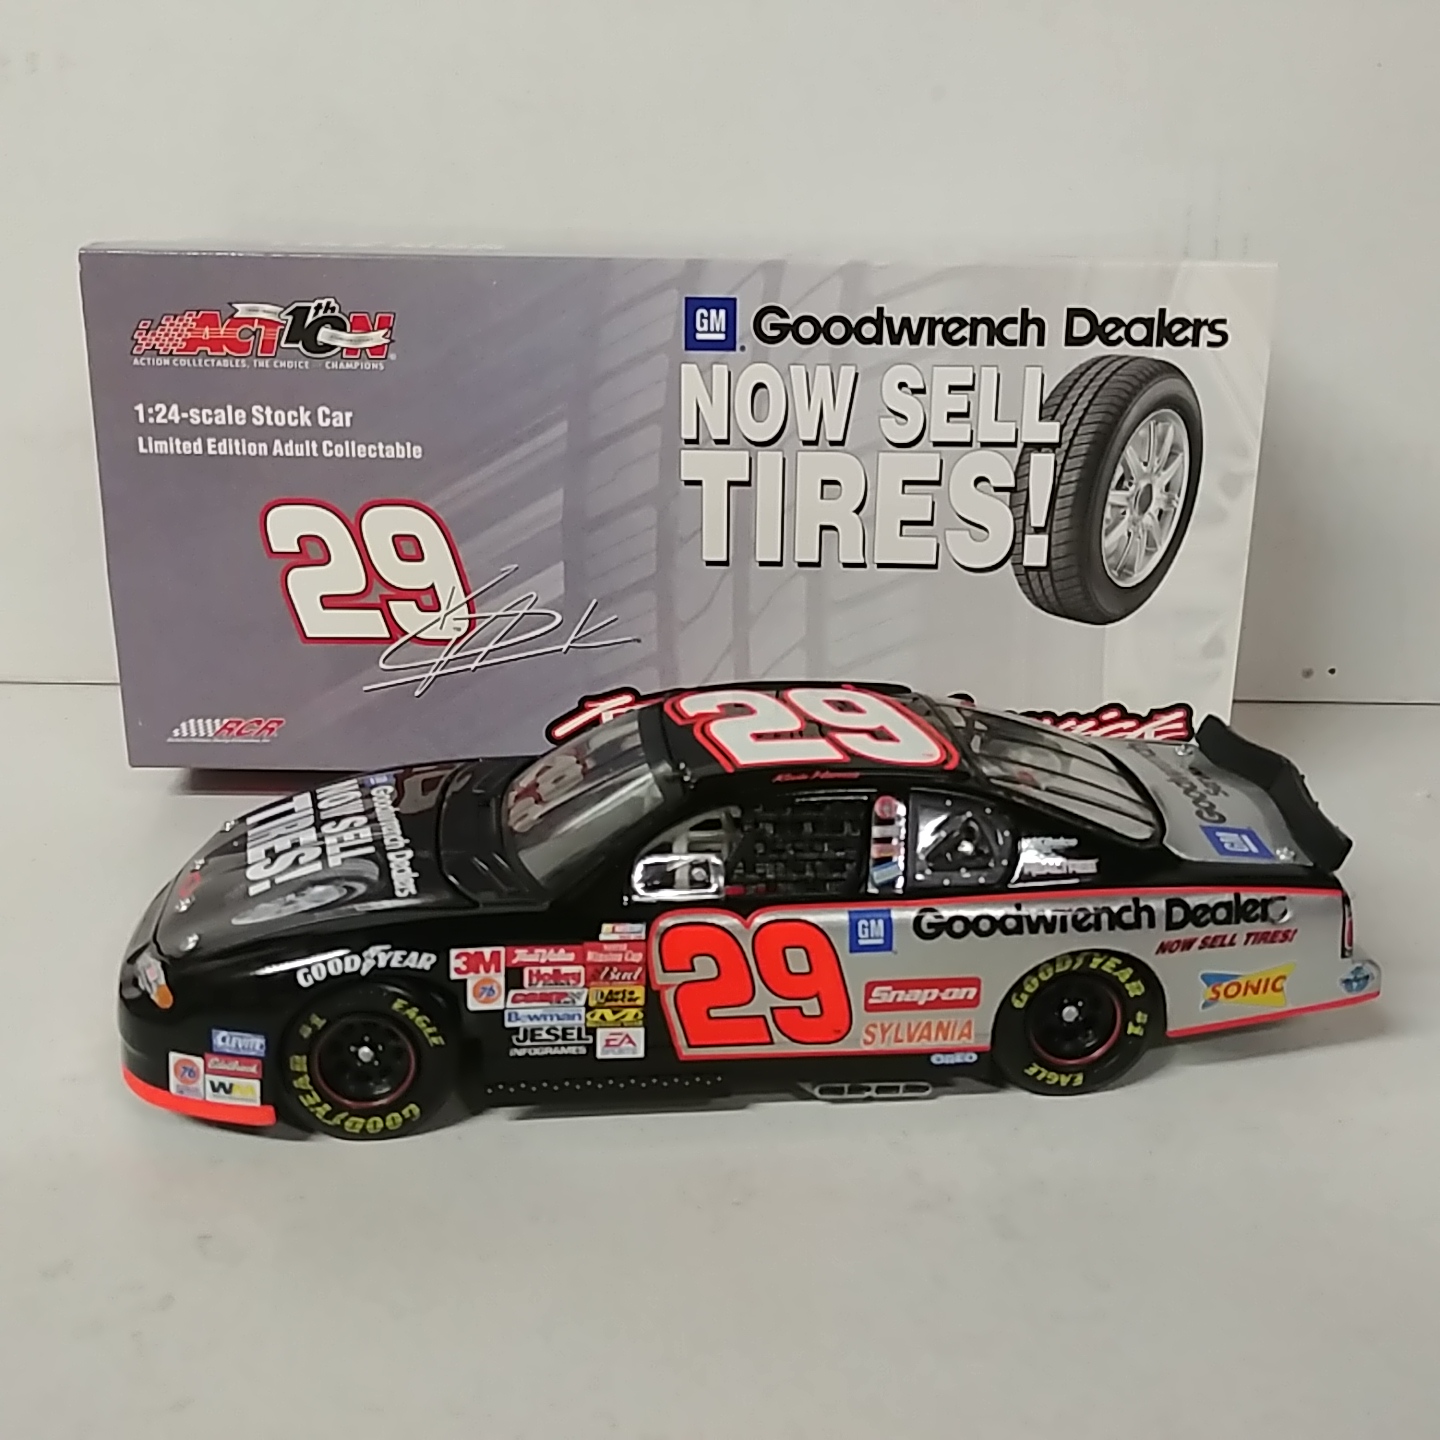 2002 Kevin Harvick 1/24th Goodwrench Dealers "Now Sell Tires" c/w car